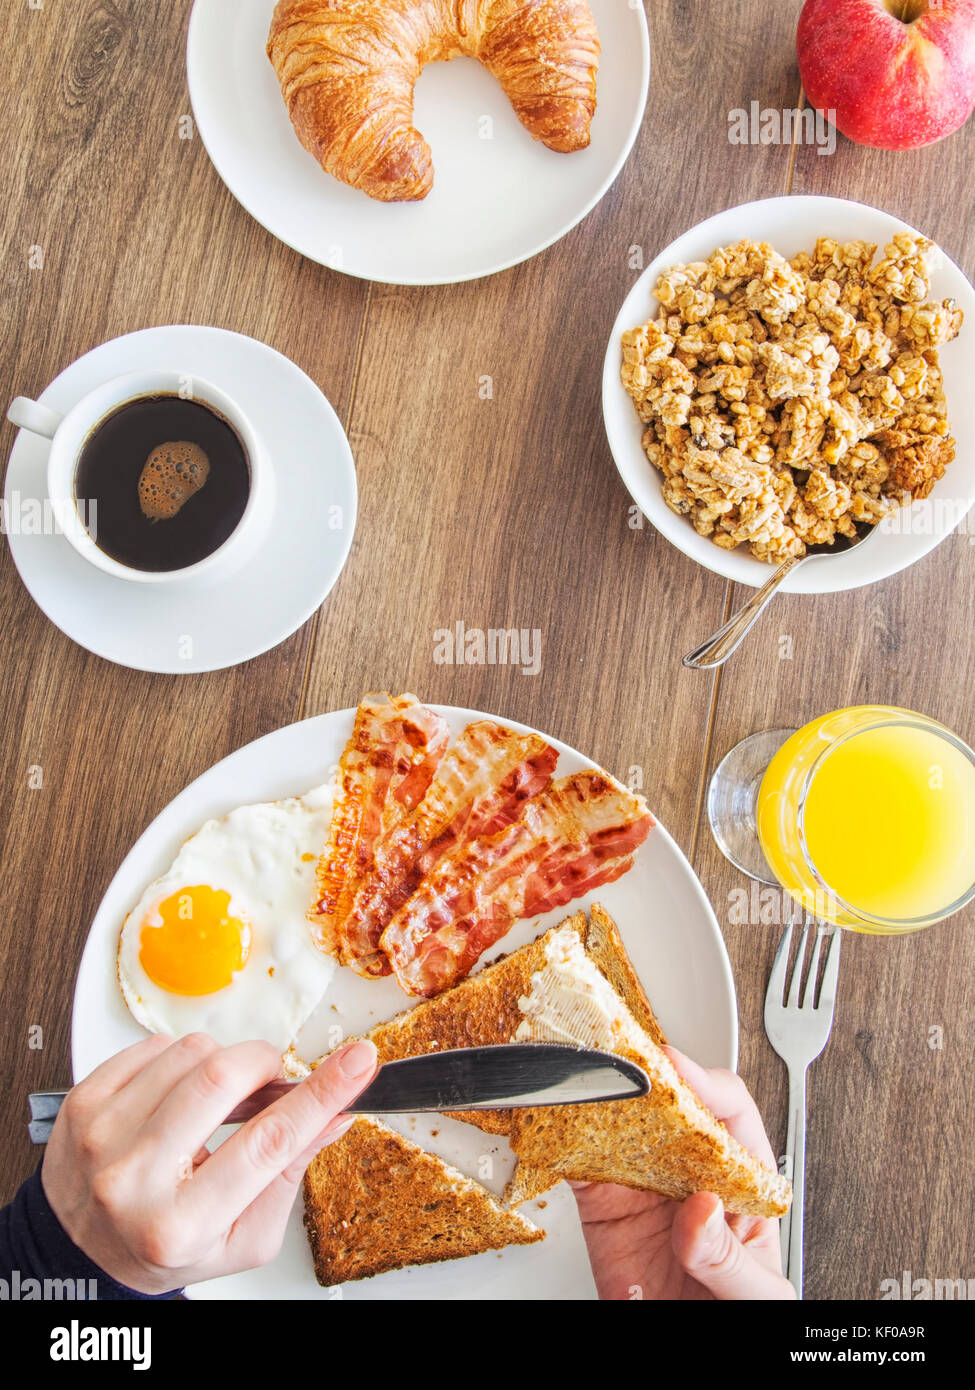 https://c8.alamy.com/comp/KF0A9R/breakfast-served-with-eggs-bacon-coffee-croissant-cereals-juice-and-KF0A9R.jpg